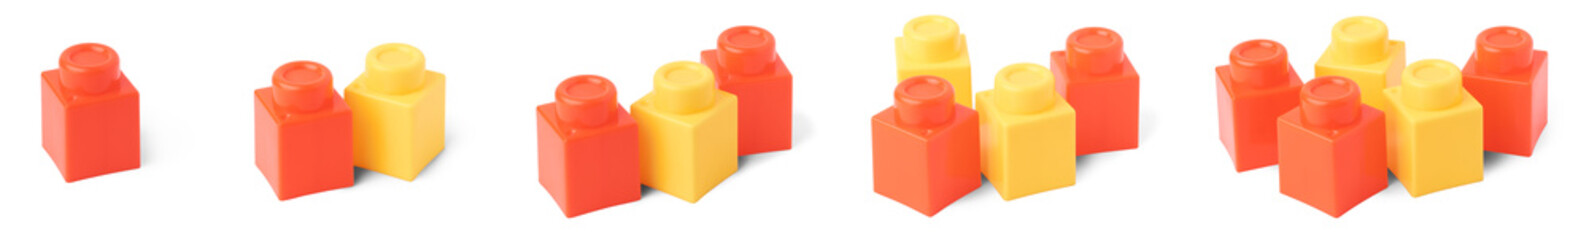 toy blocks for children counting number one to five, aka building blocks, interlocking plastic...